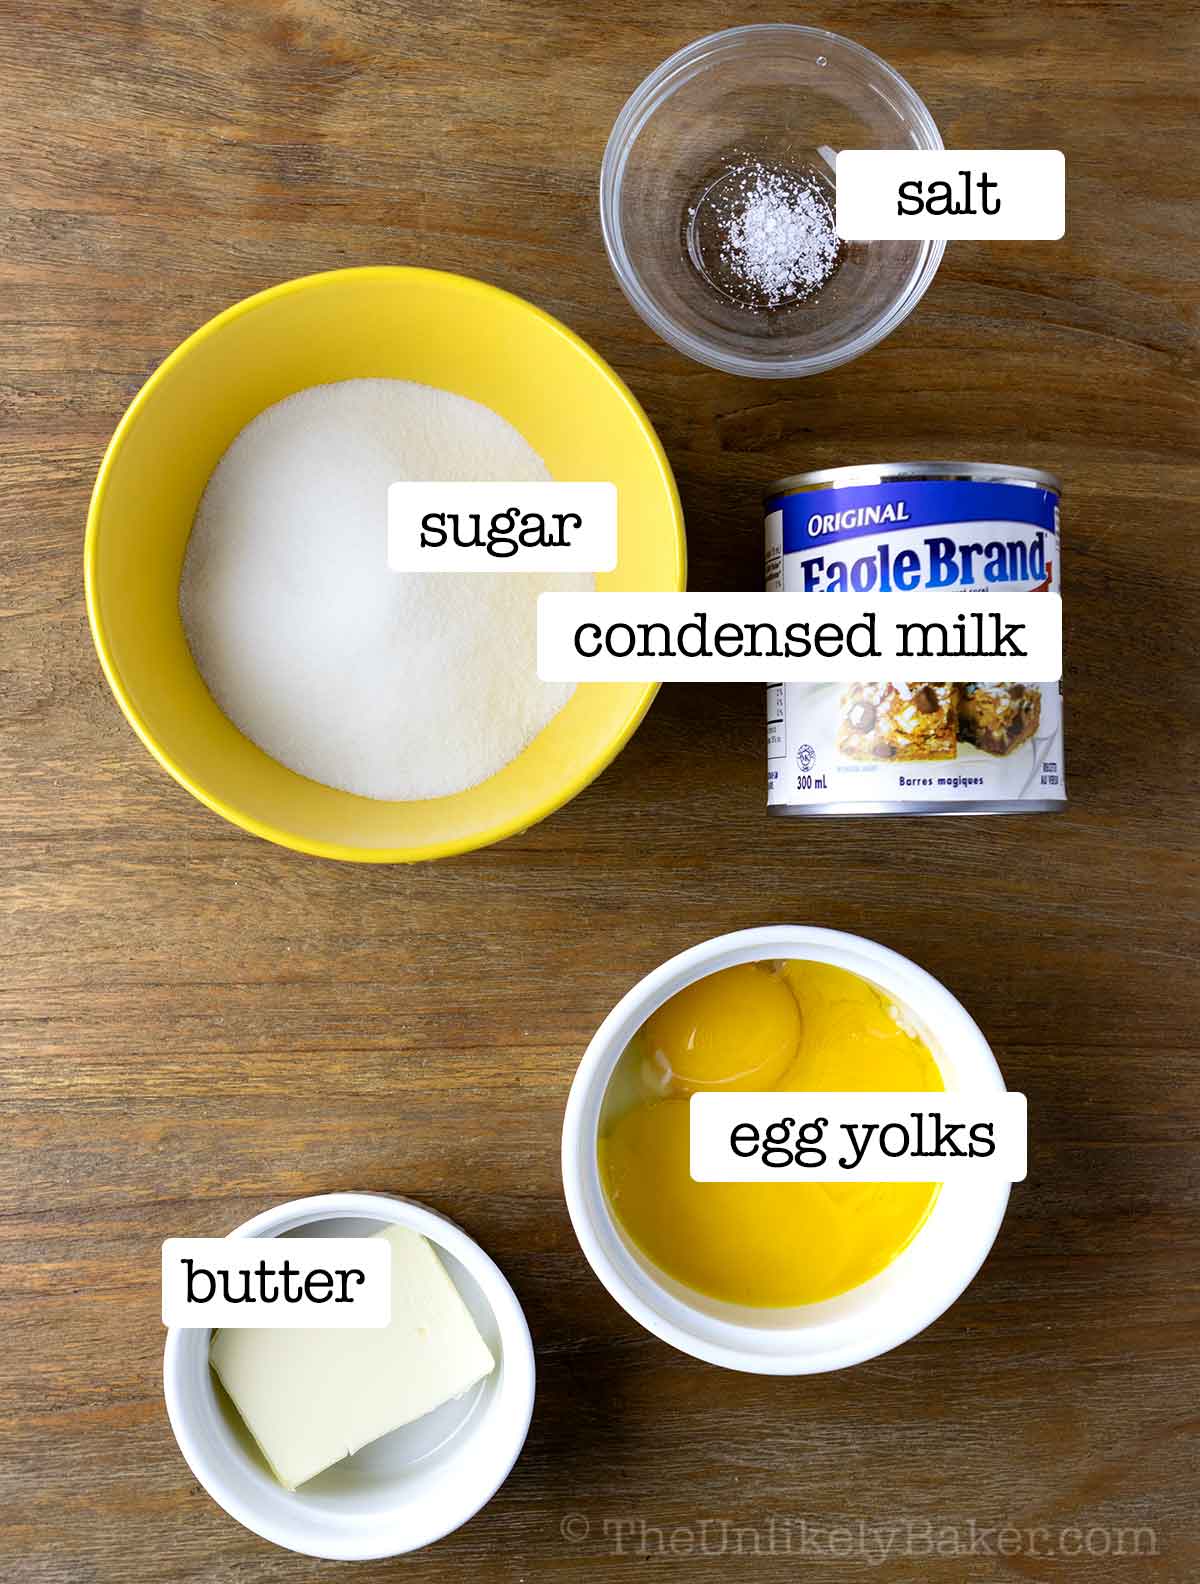 Yema ingredients with text overlay.